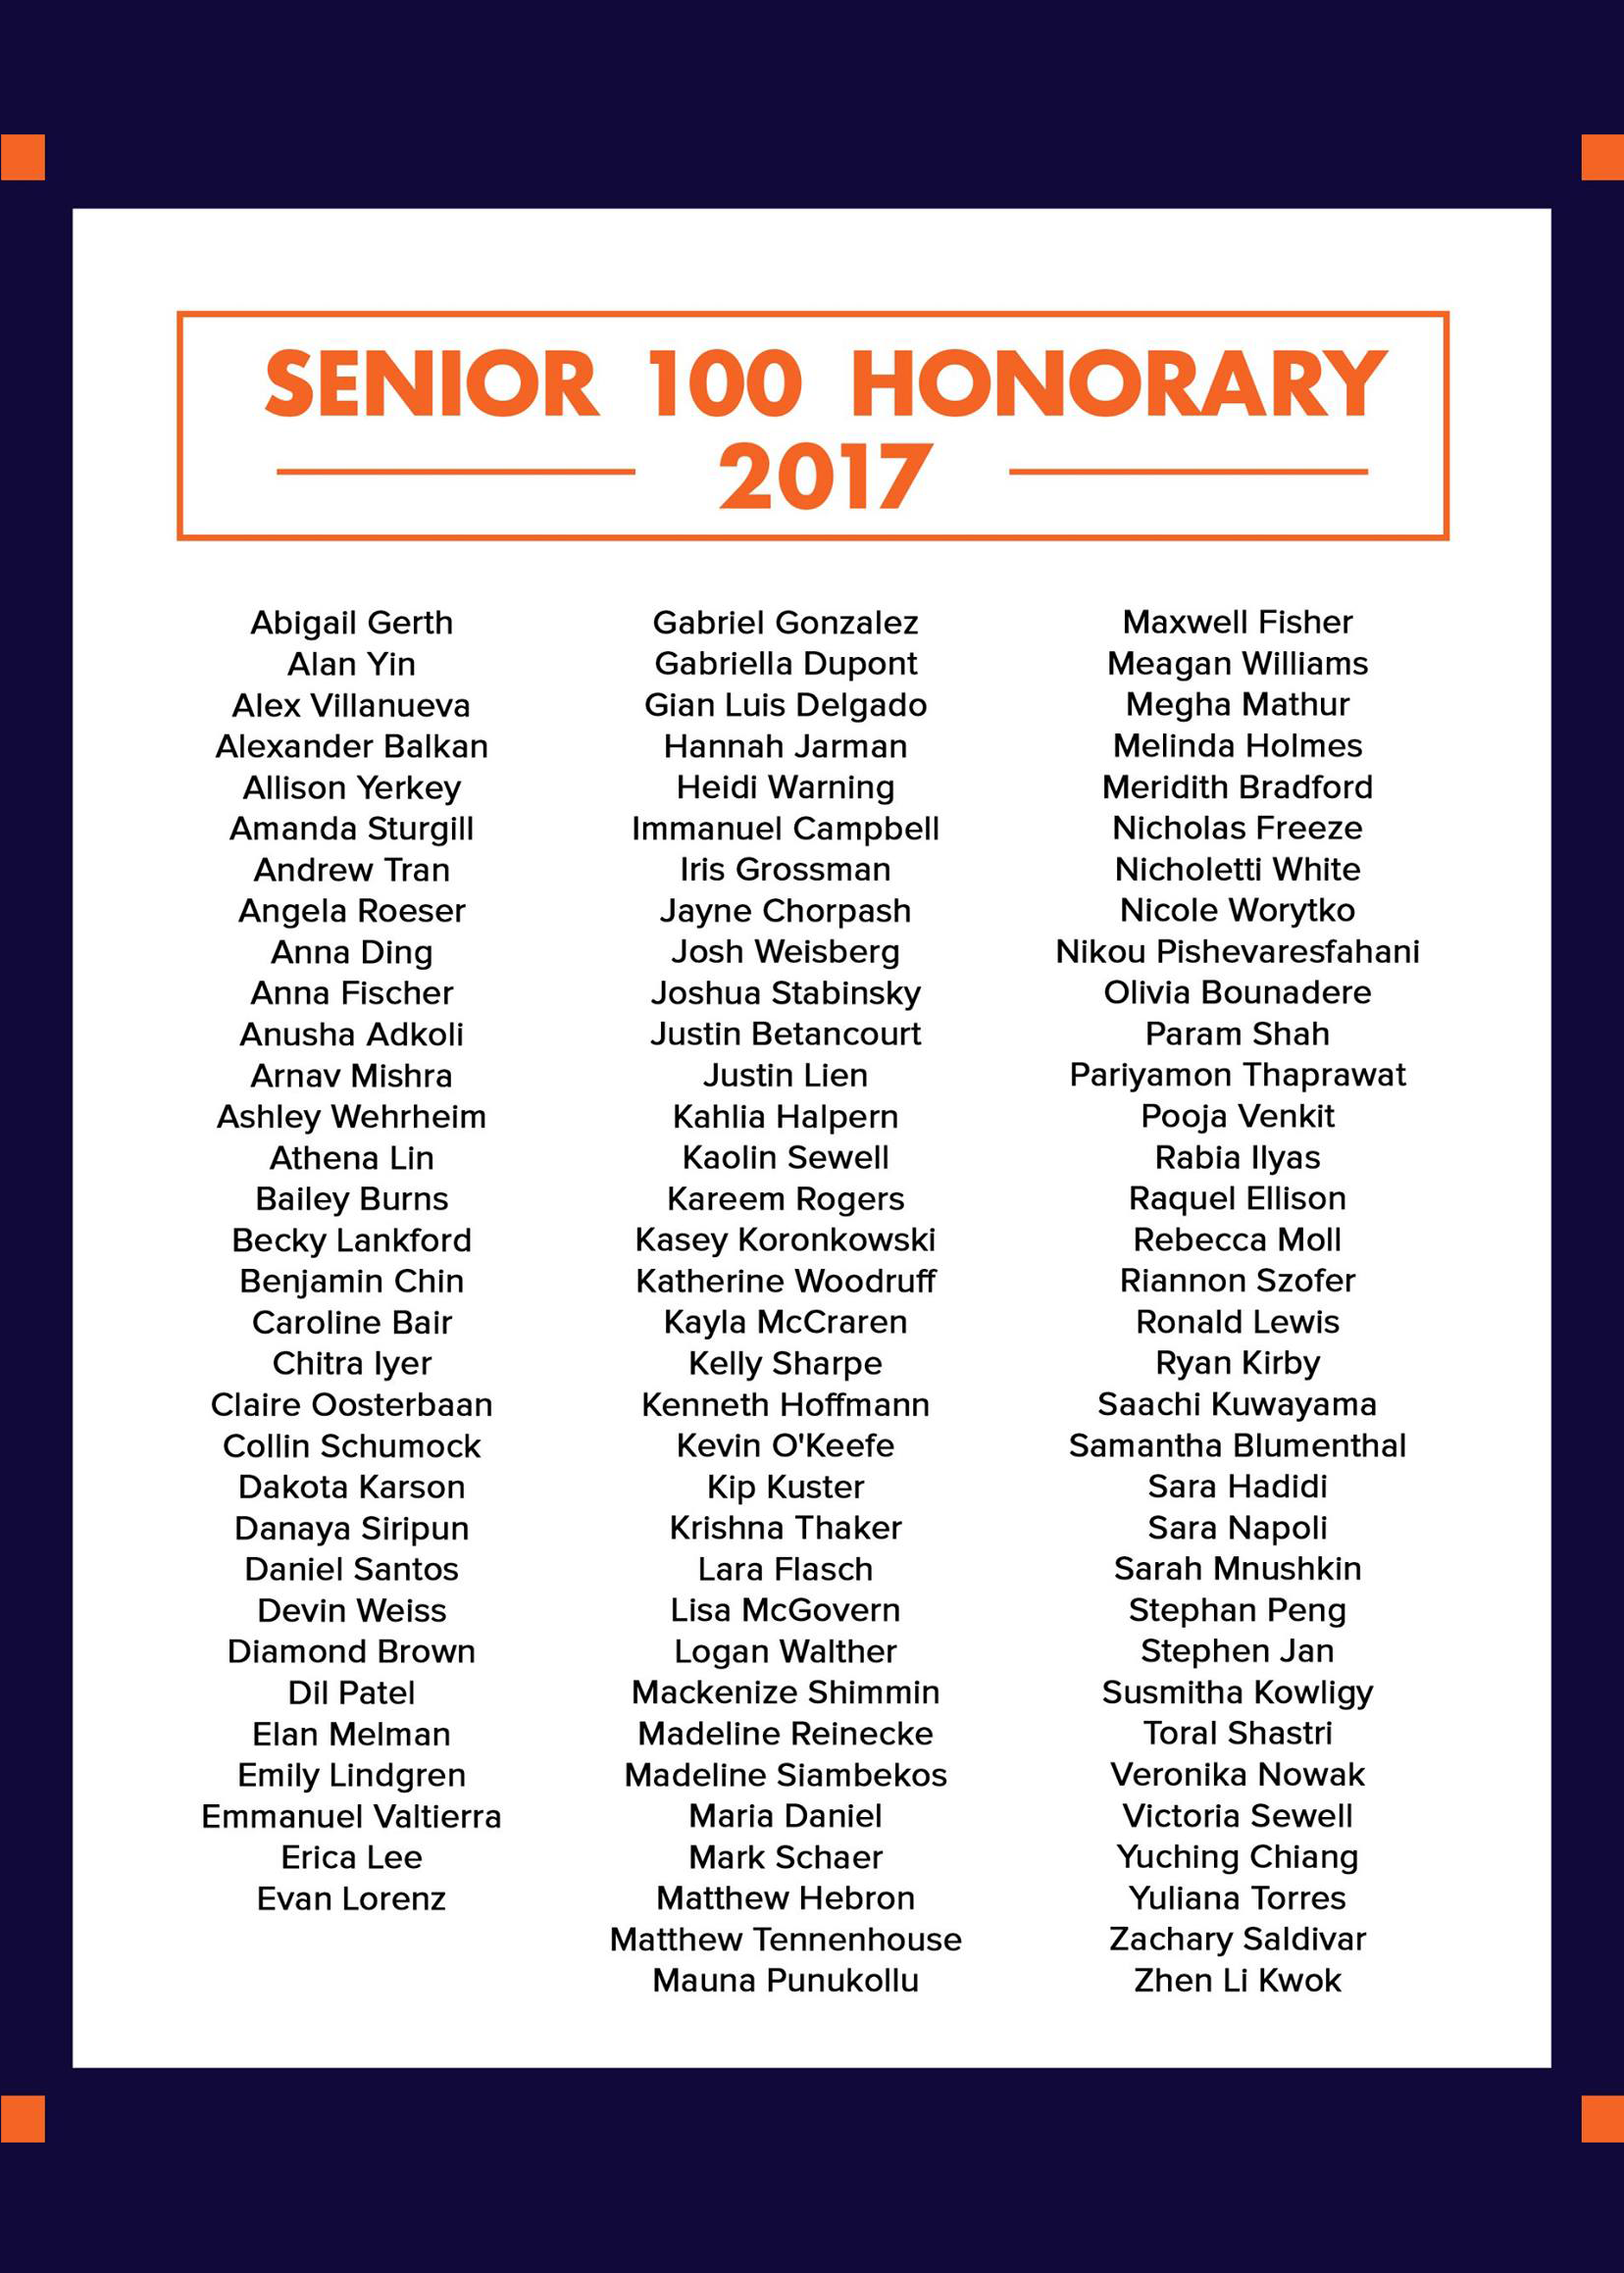 The full list of Senior 100 Honorary recipients (click for a larger image.) 